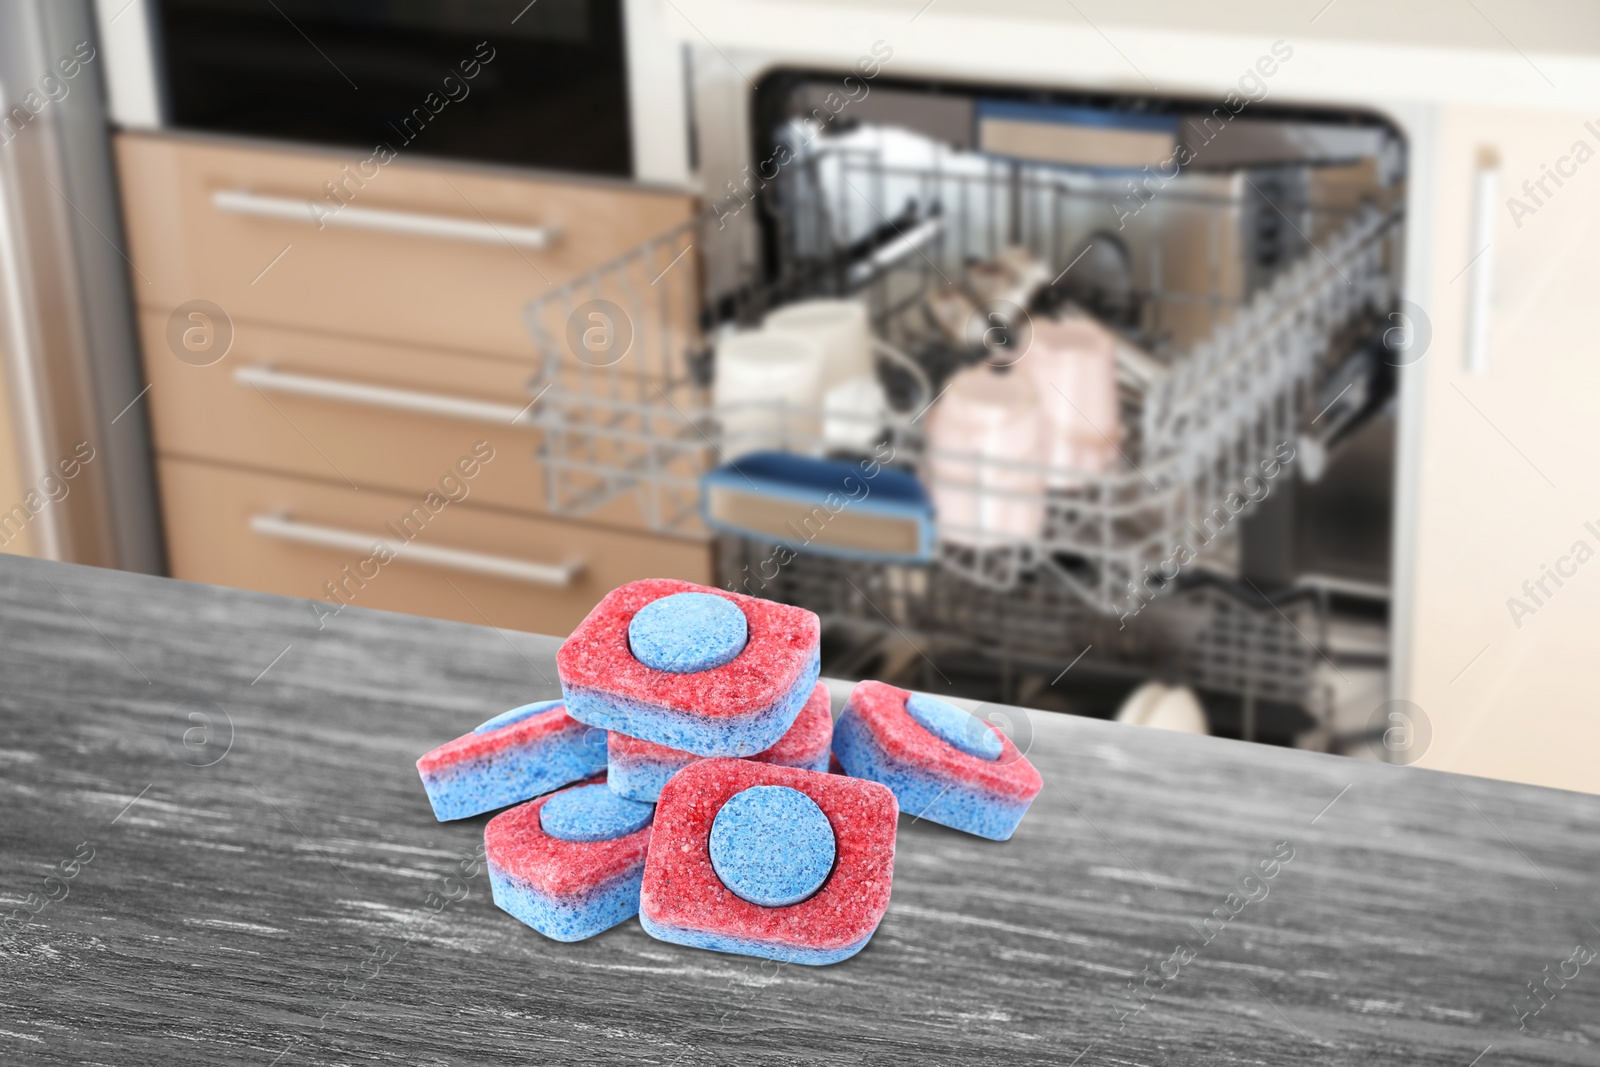 Image of Dishwasher detergent tablets on wooden table in kitchen